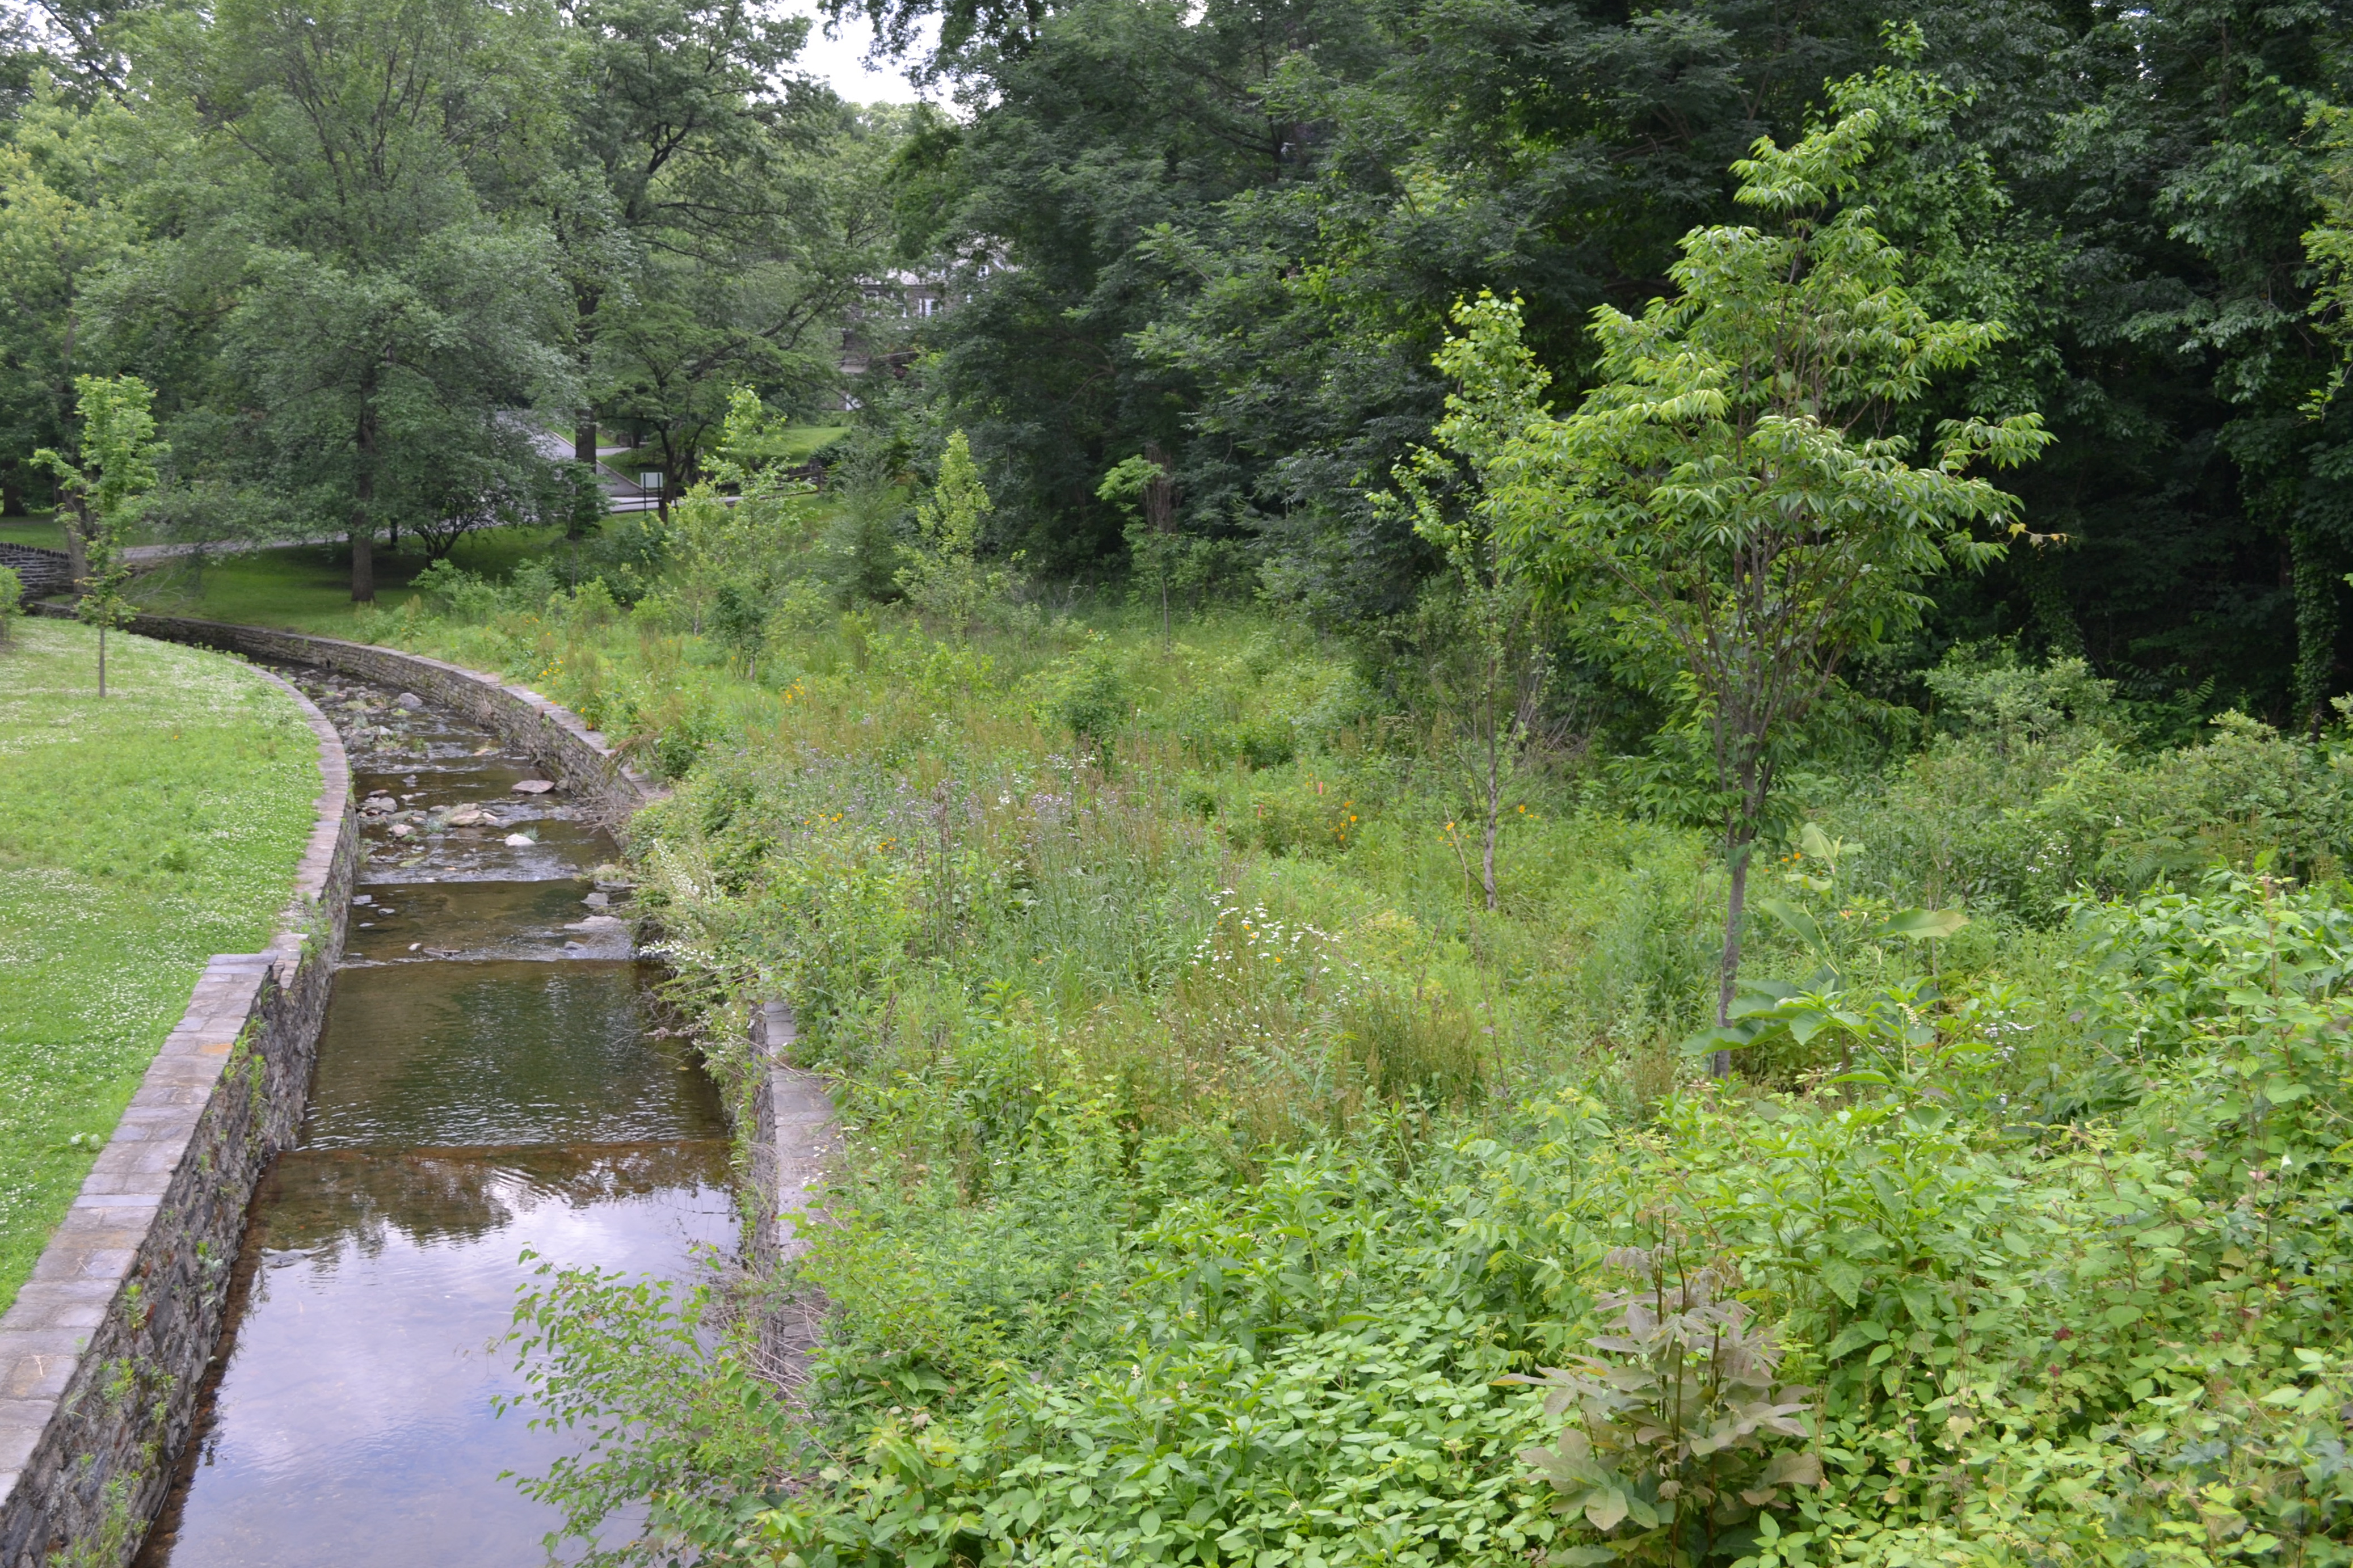 Vine Creek intersects with the trail at several points before it feeds into the Schuylkill River